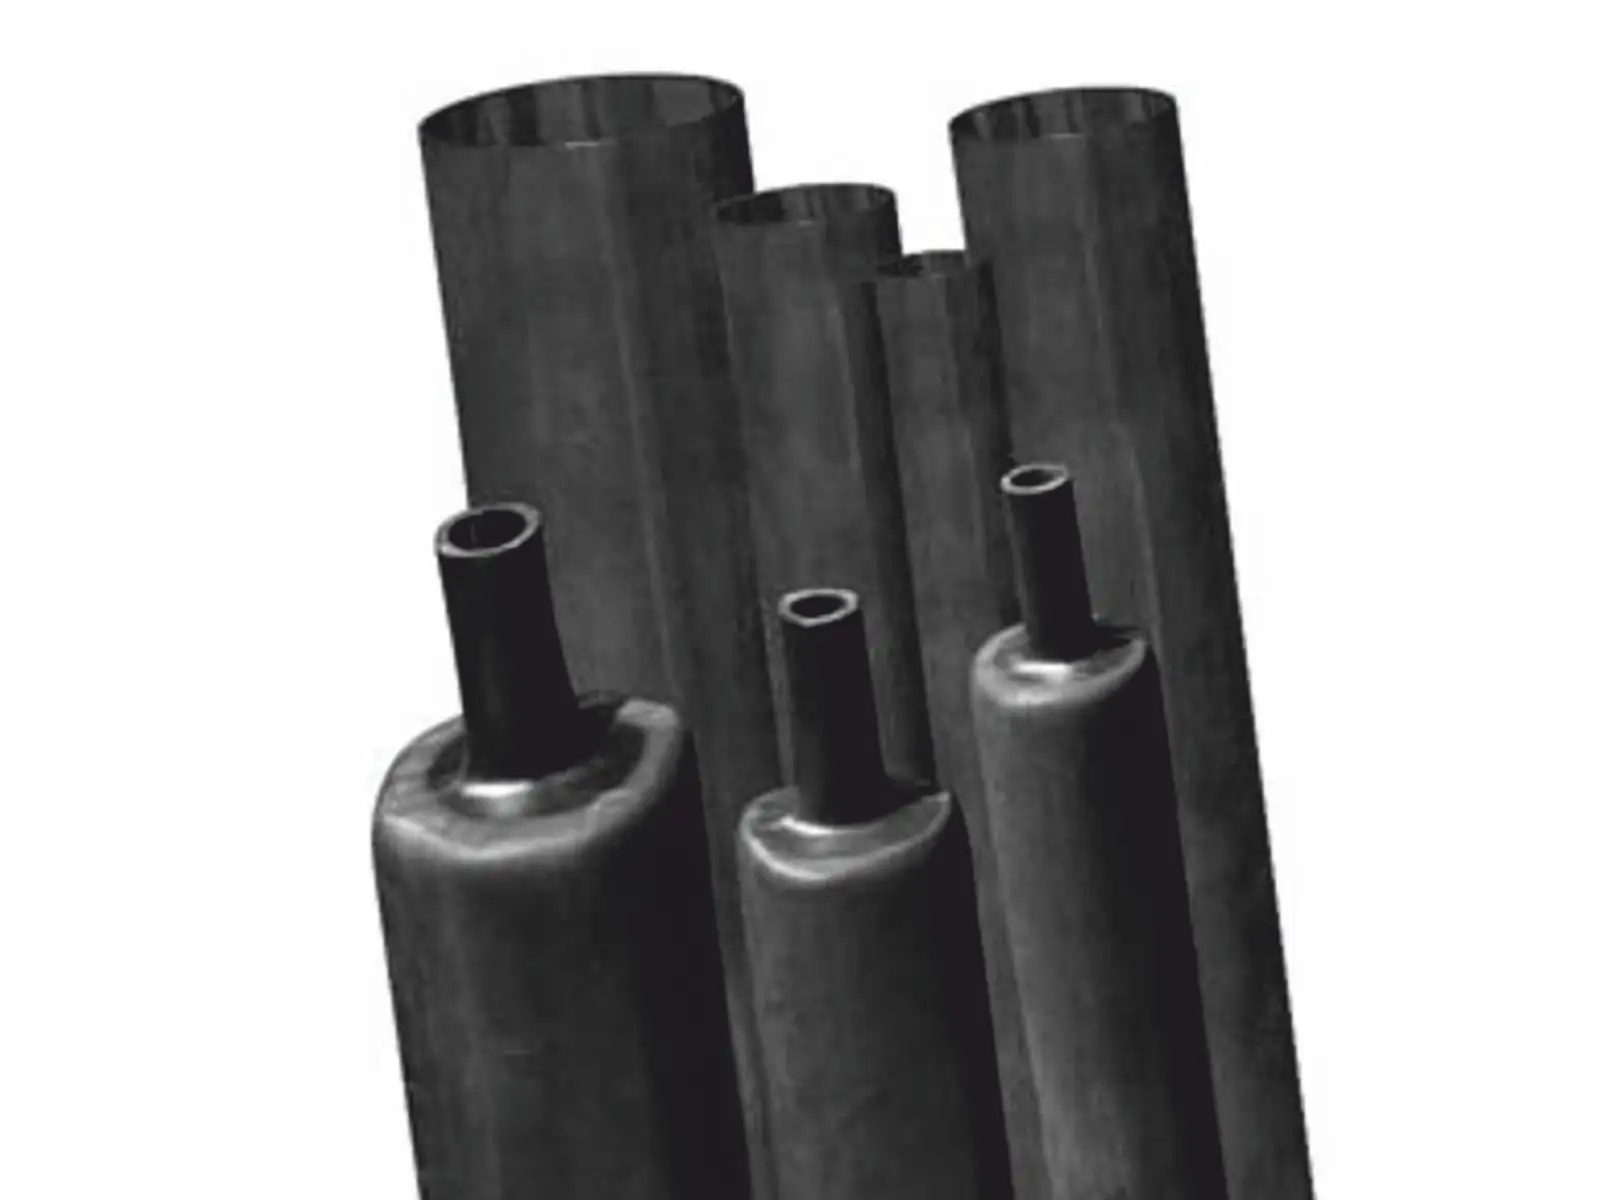 Why source polyolefin heat shrink tubes from China?